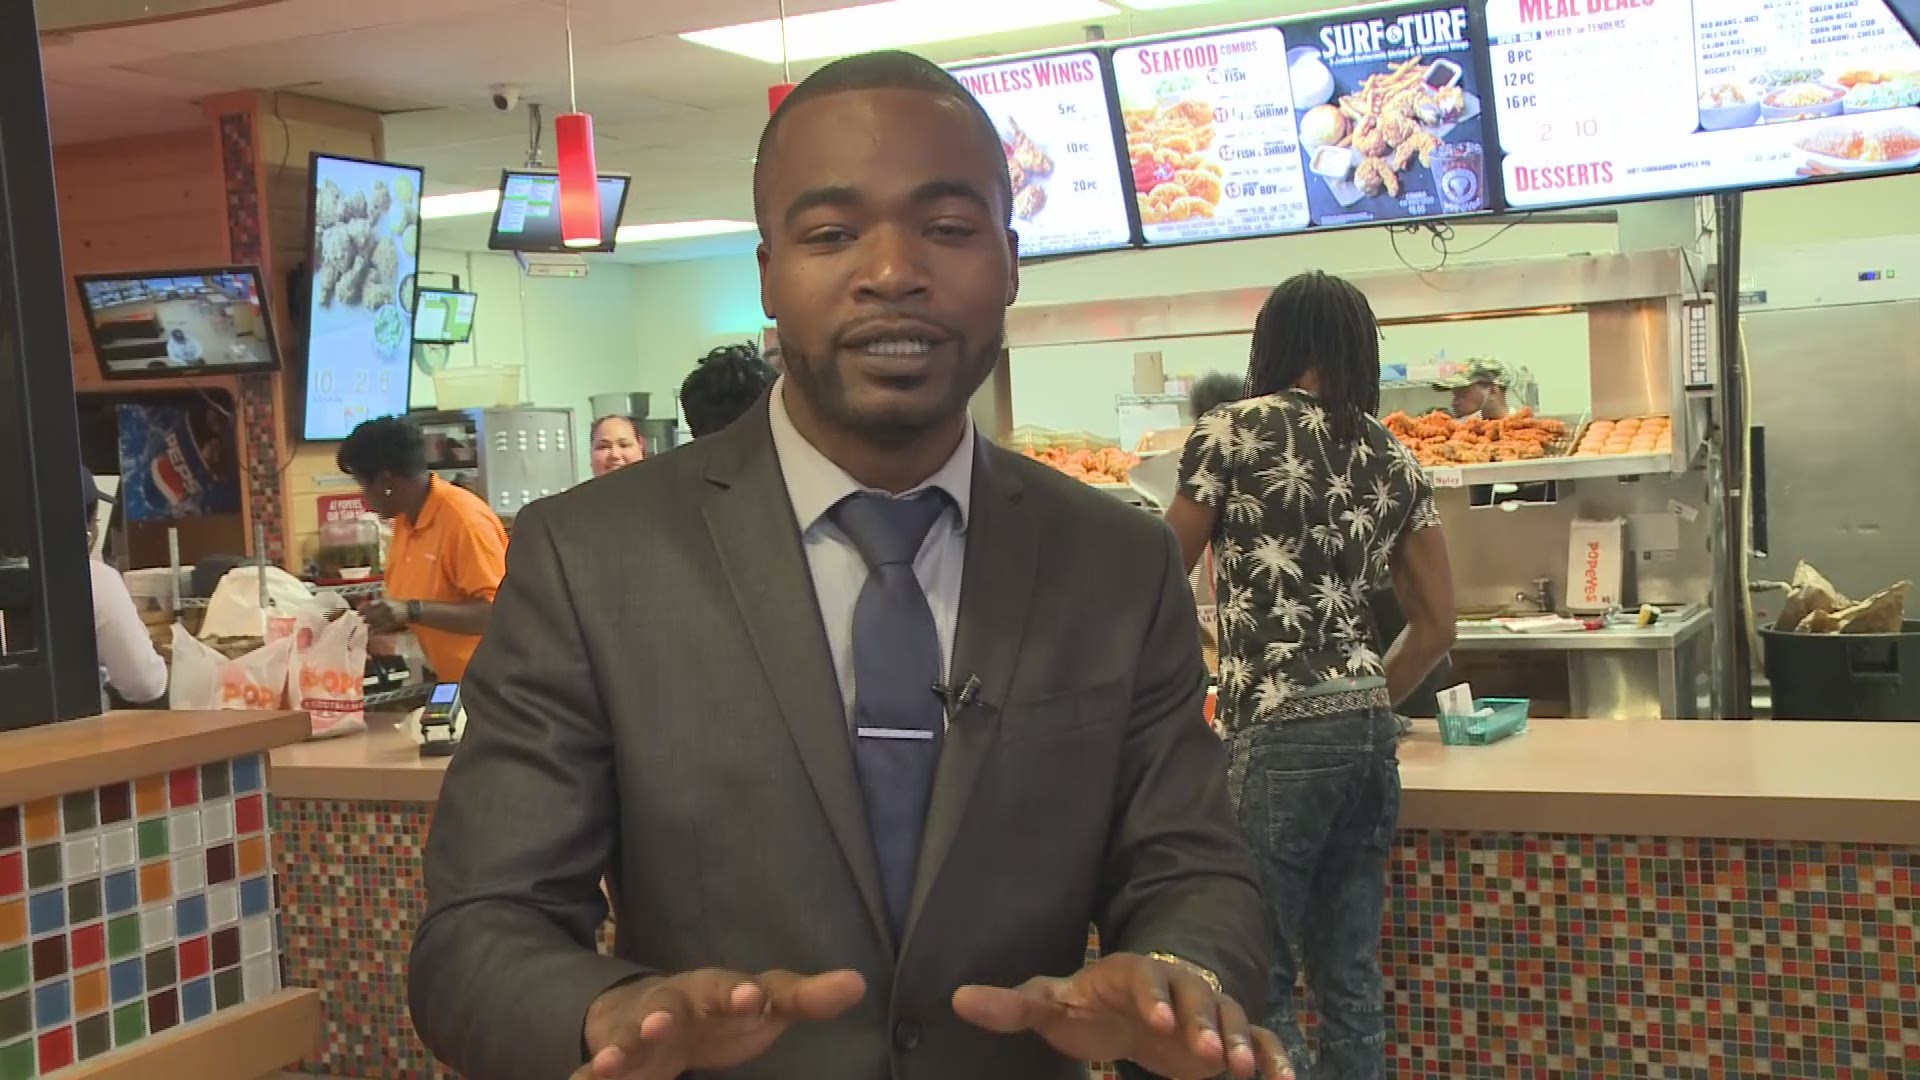 Tonight on Channel 3 News at 11, Ray Strickland heads to a local Popeyes restaurant to check out what diners are saying about the new chicken sandwich.